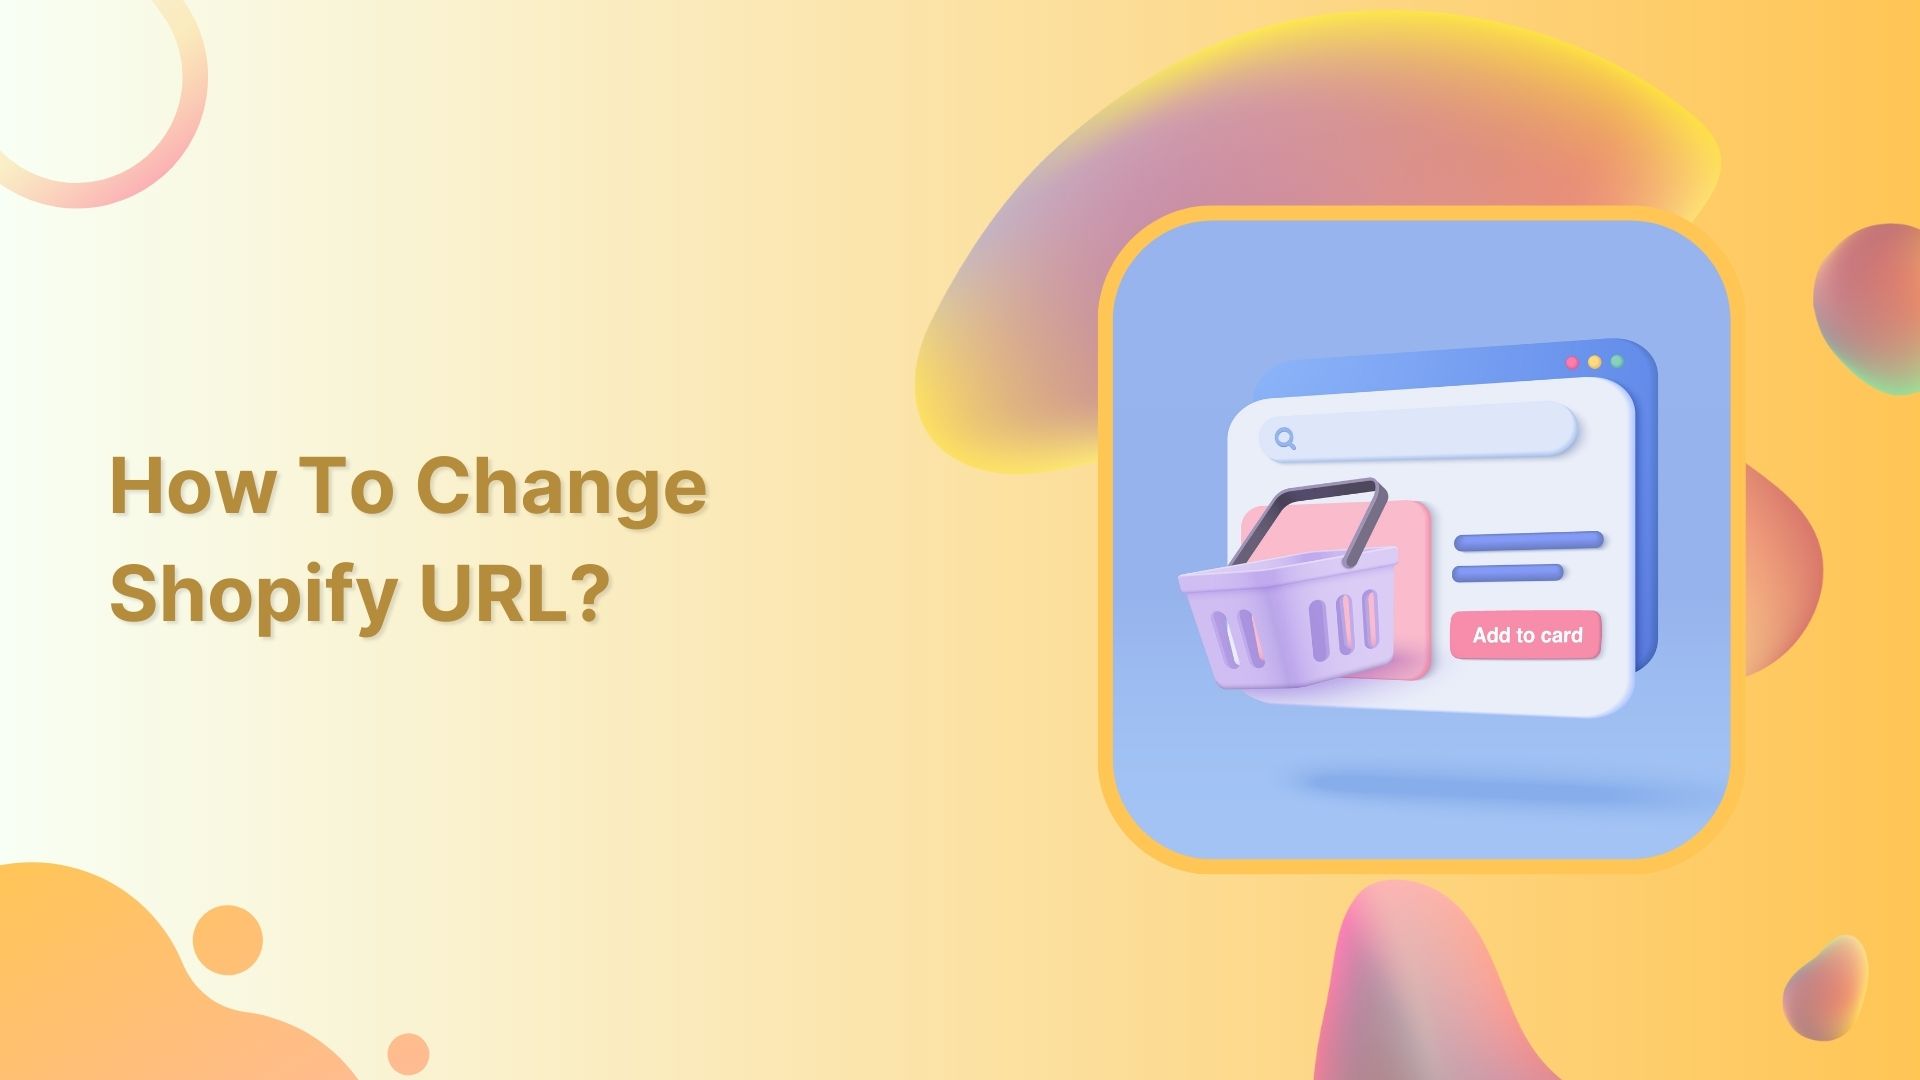 How to change Shopify URL for sharing on social media?